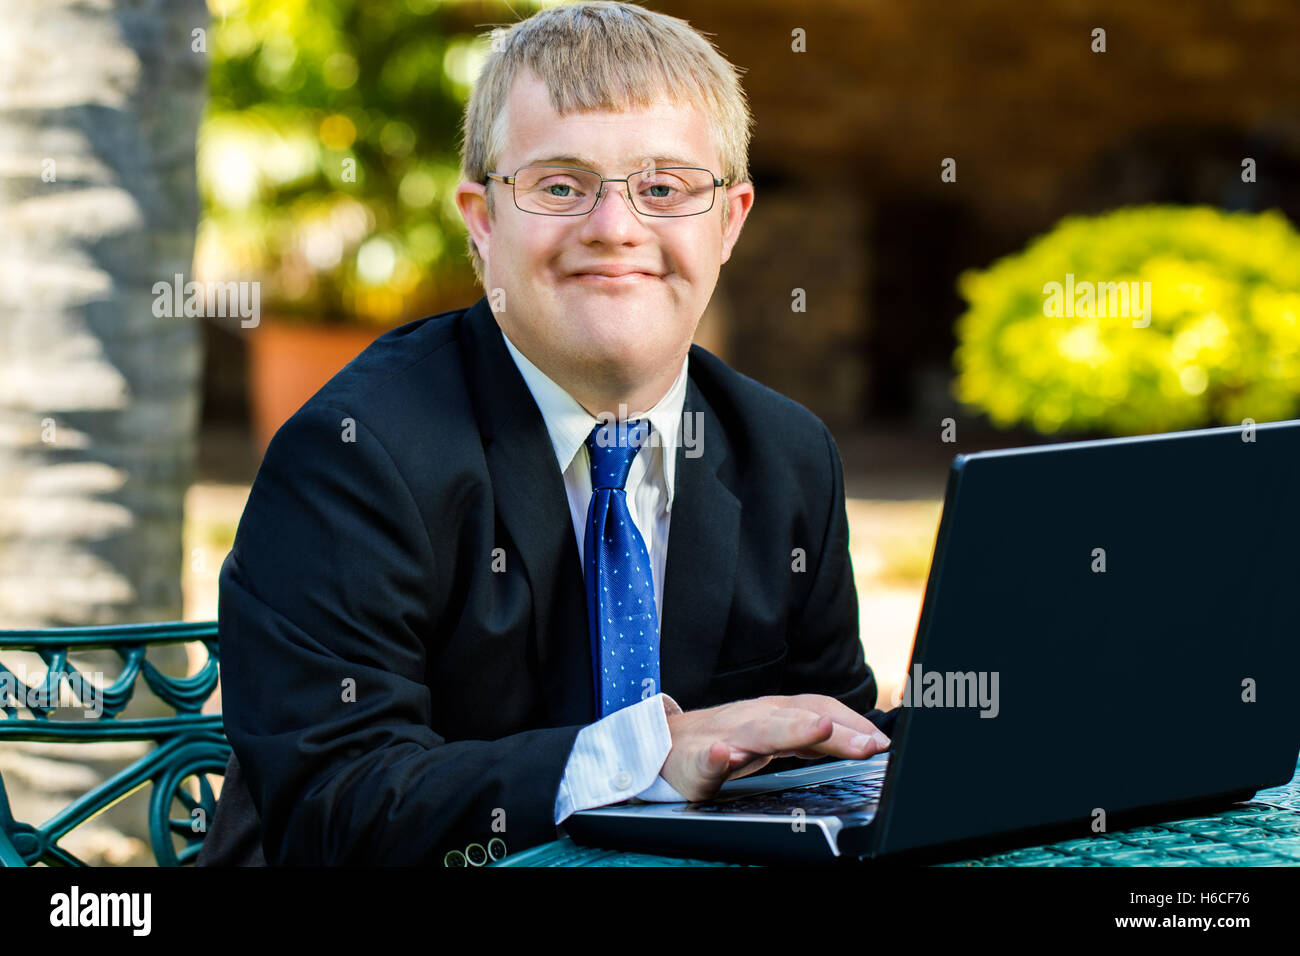 Close up portrait of young businessman with down syndrome doing accounting on laptop outdoors. Stock Photo